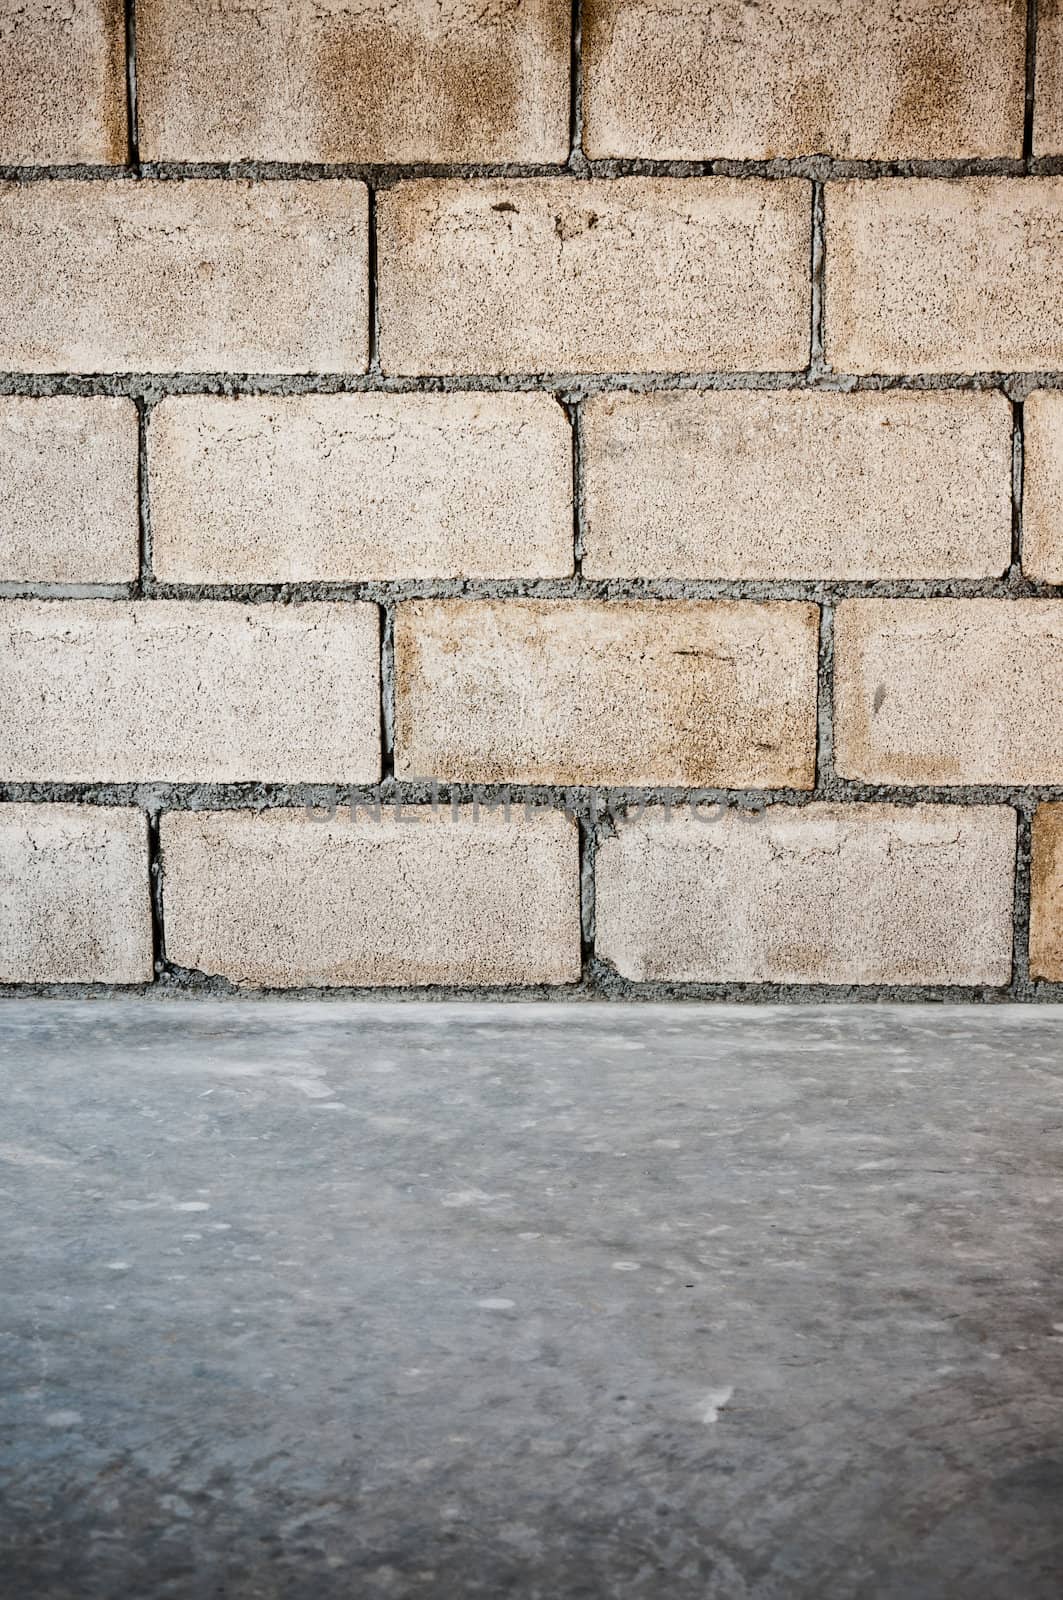 Block of concrete wall background